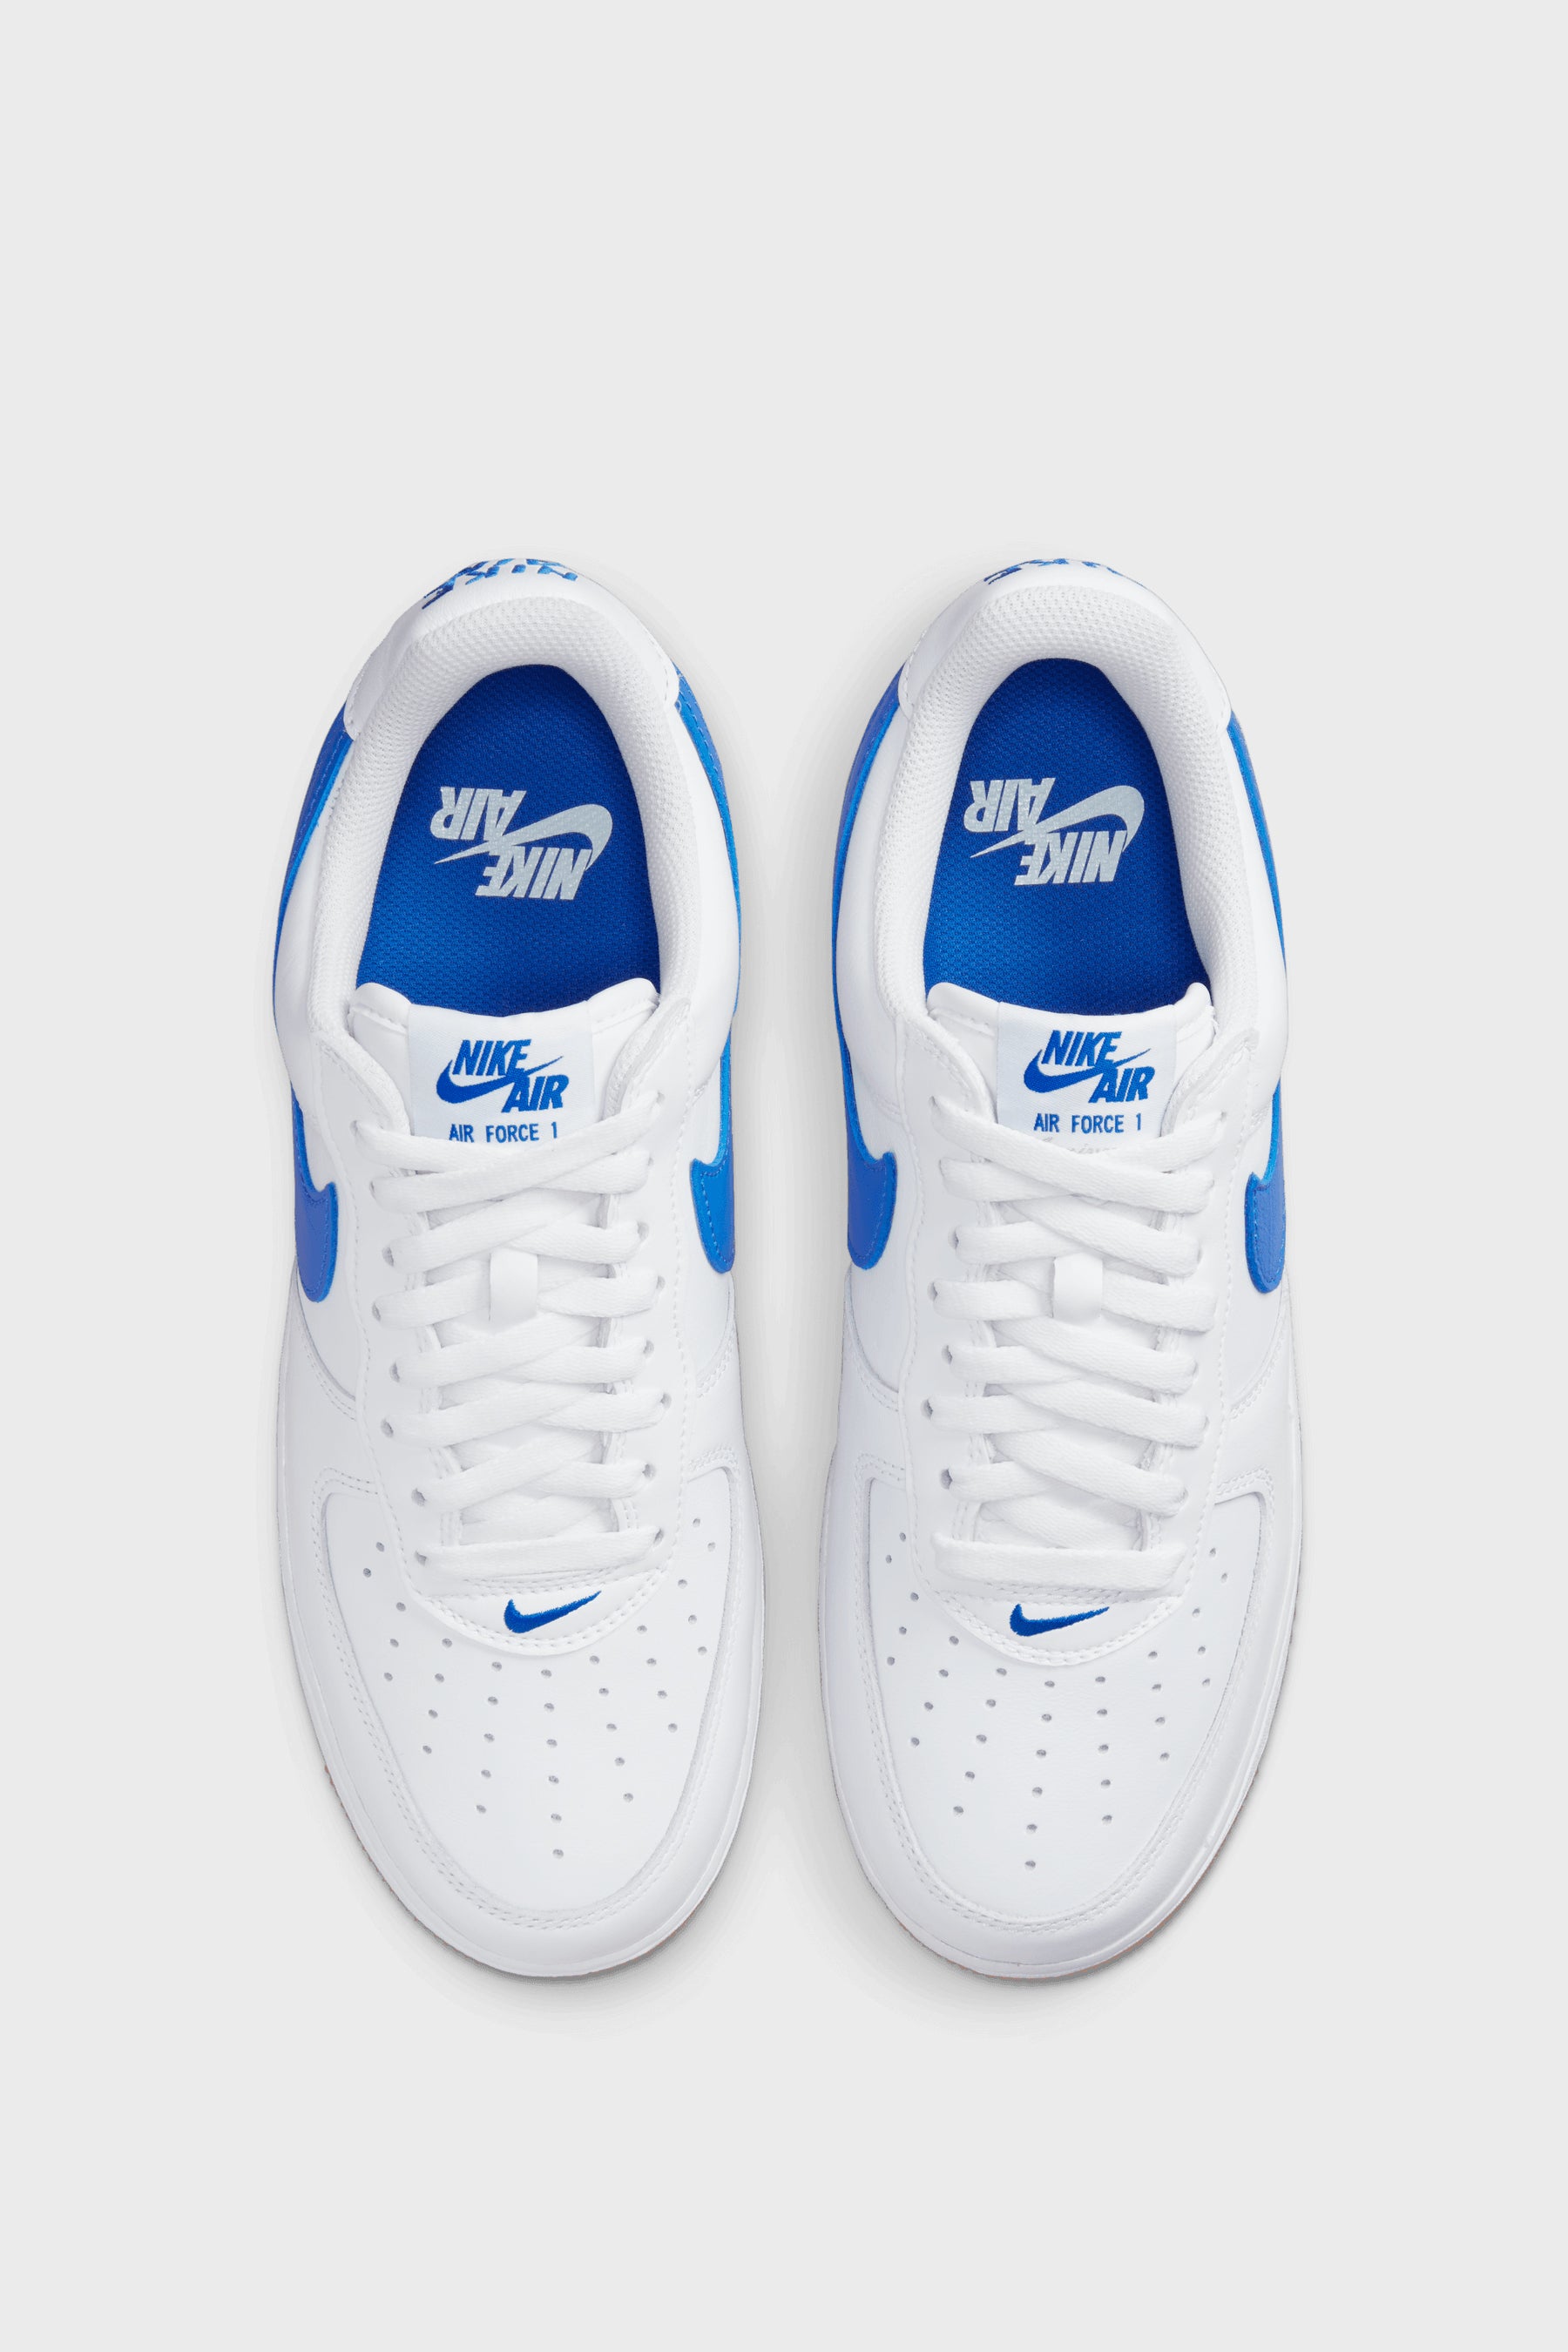 Air Force 1 Low Retro White/Royal Blue/Gum Yellow DJ3911-101 (LAUNCH  PRODUCT)